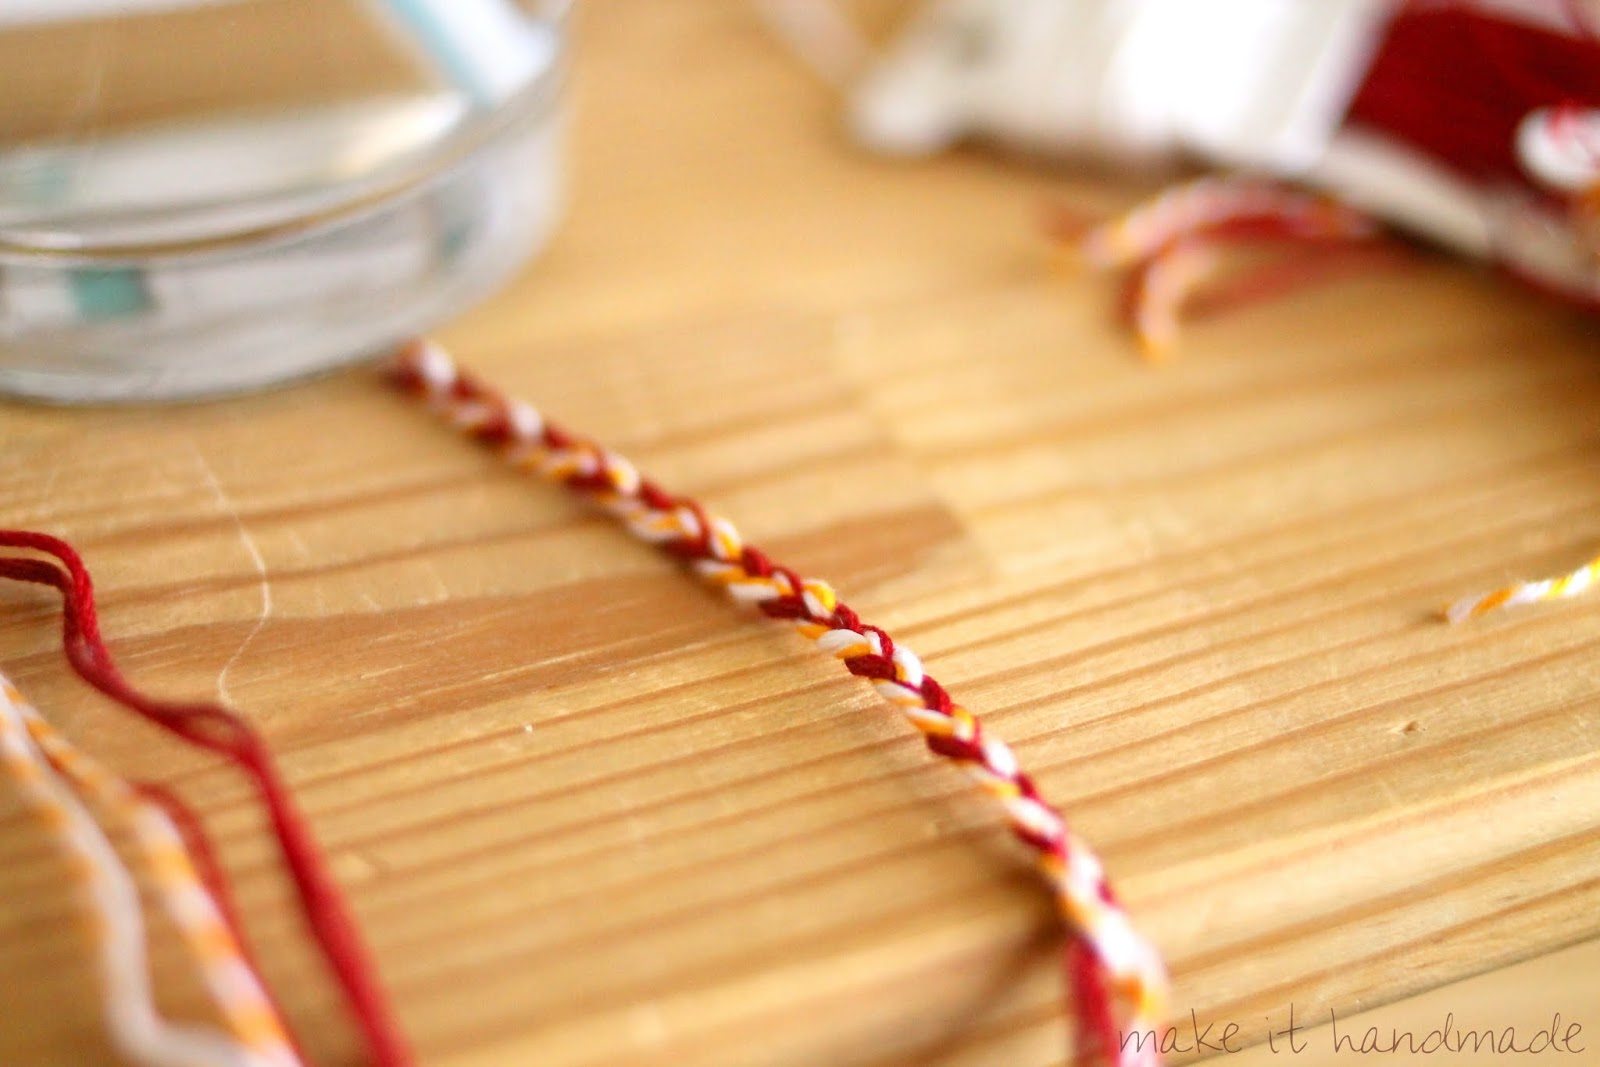 Tips for making your own braided Rakhis and friendship bracelets. 